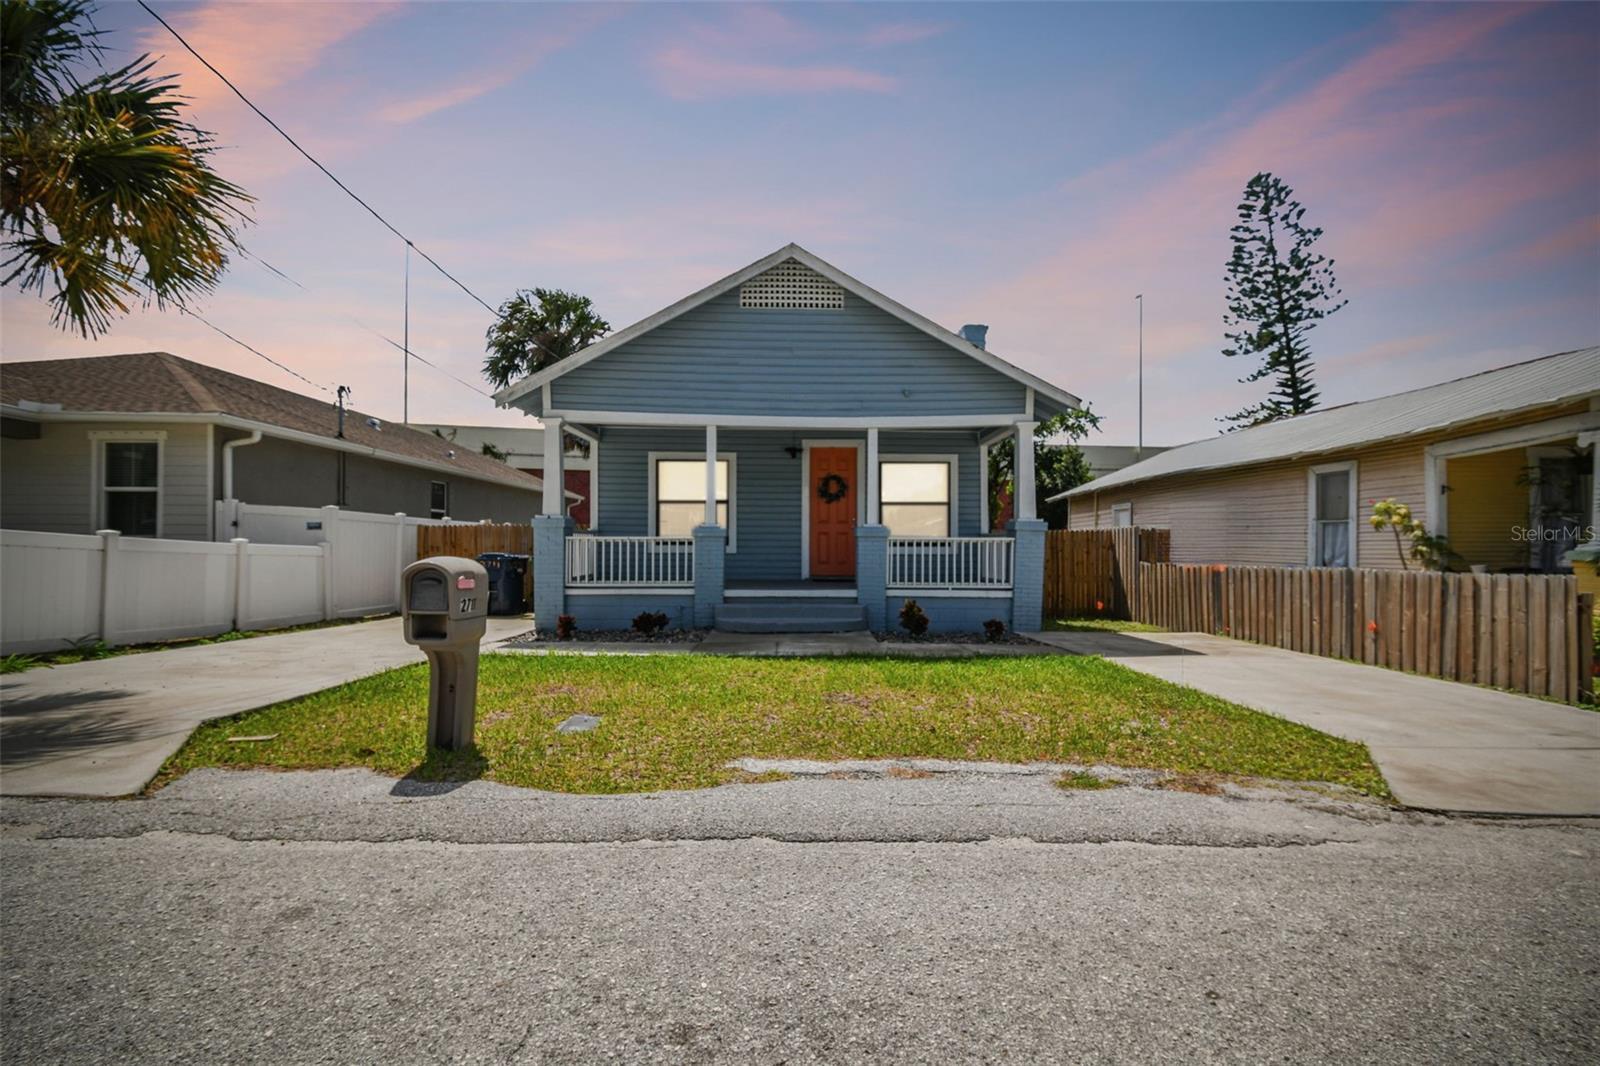 Photo one of 2711 E 15Th Ave Tampa FL 33605 | MLS T3511336